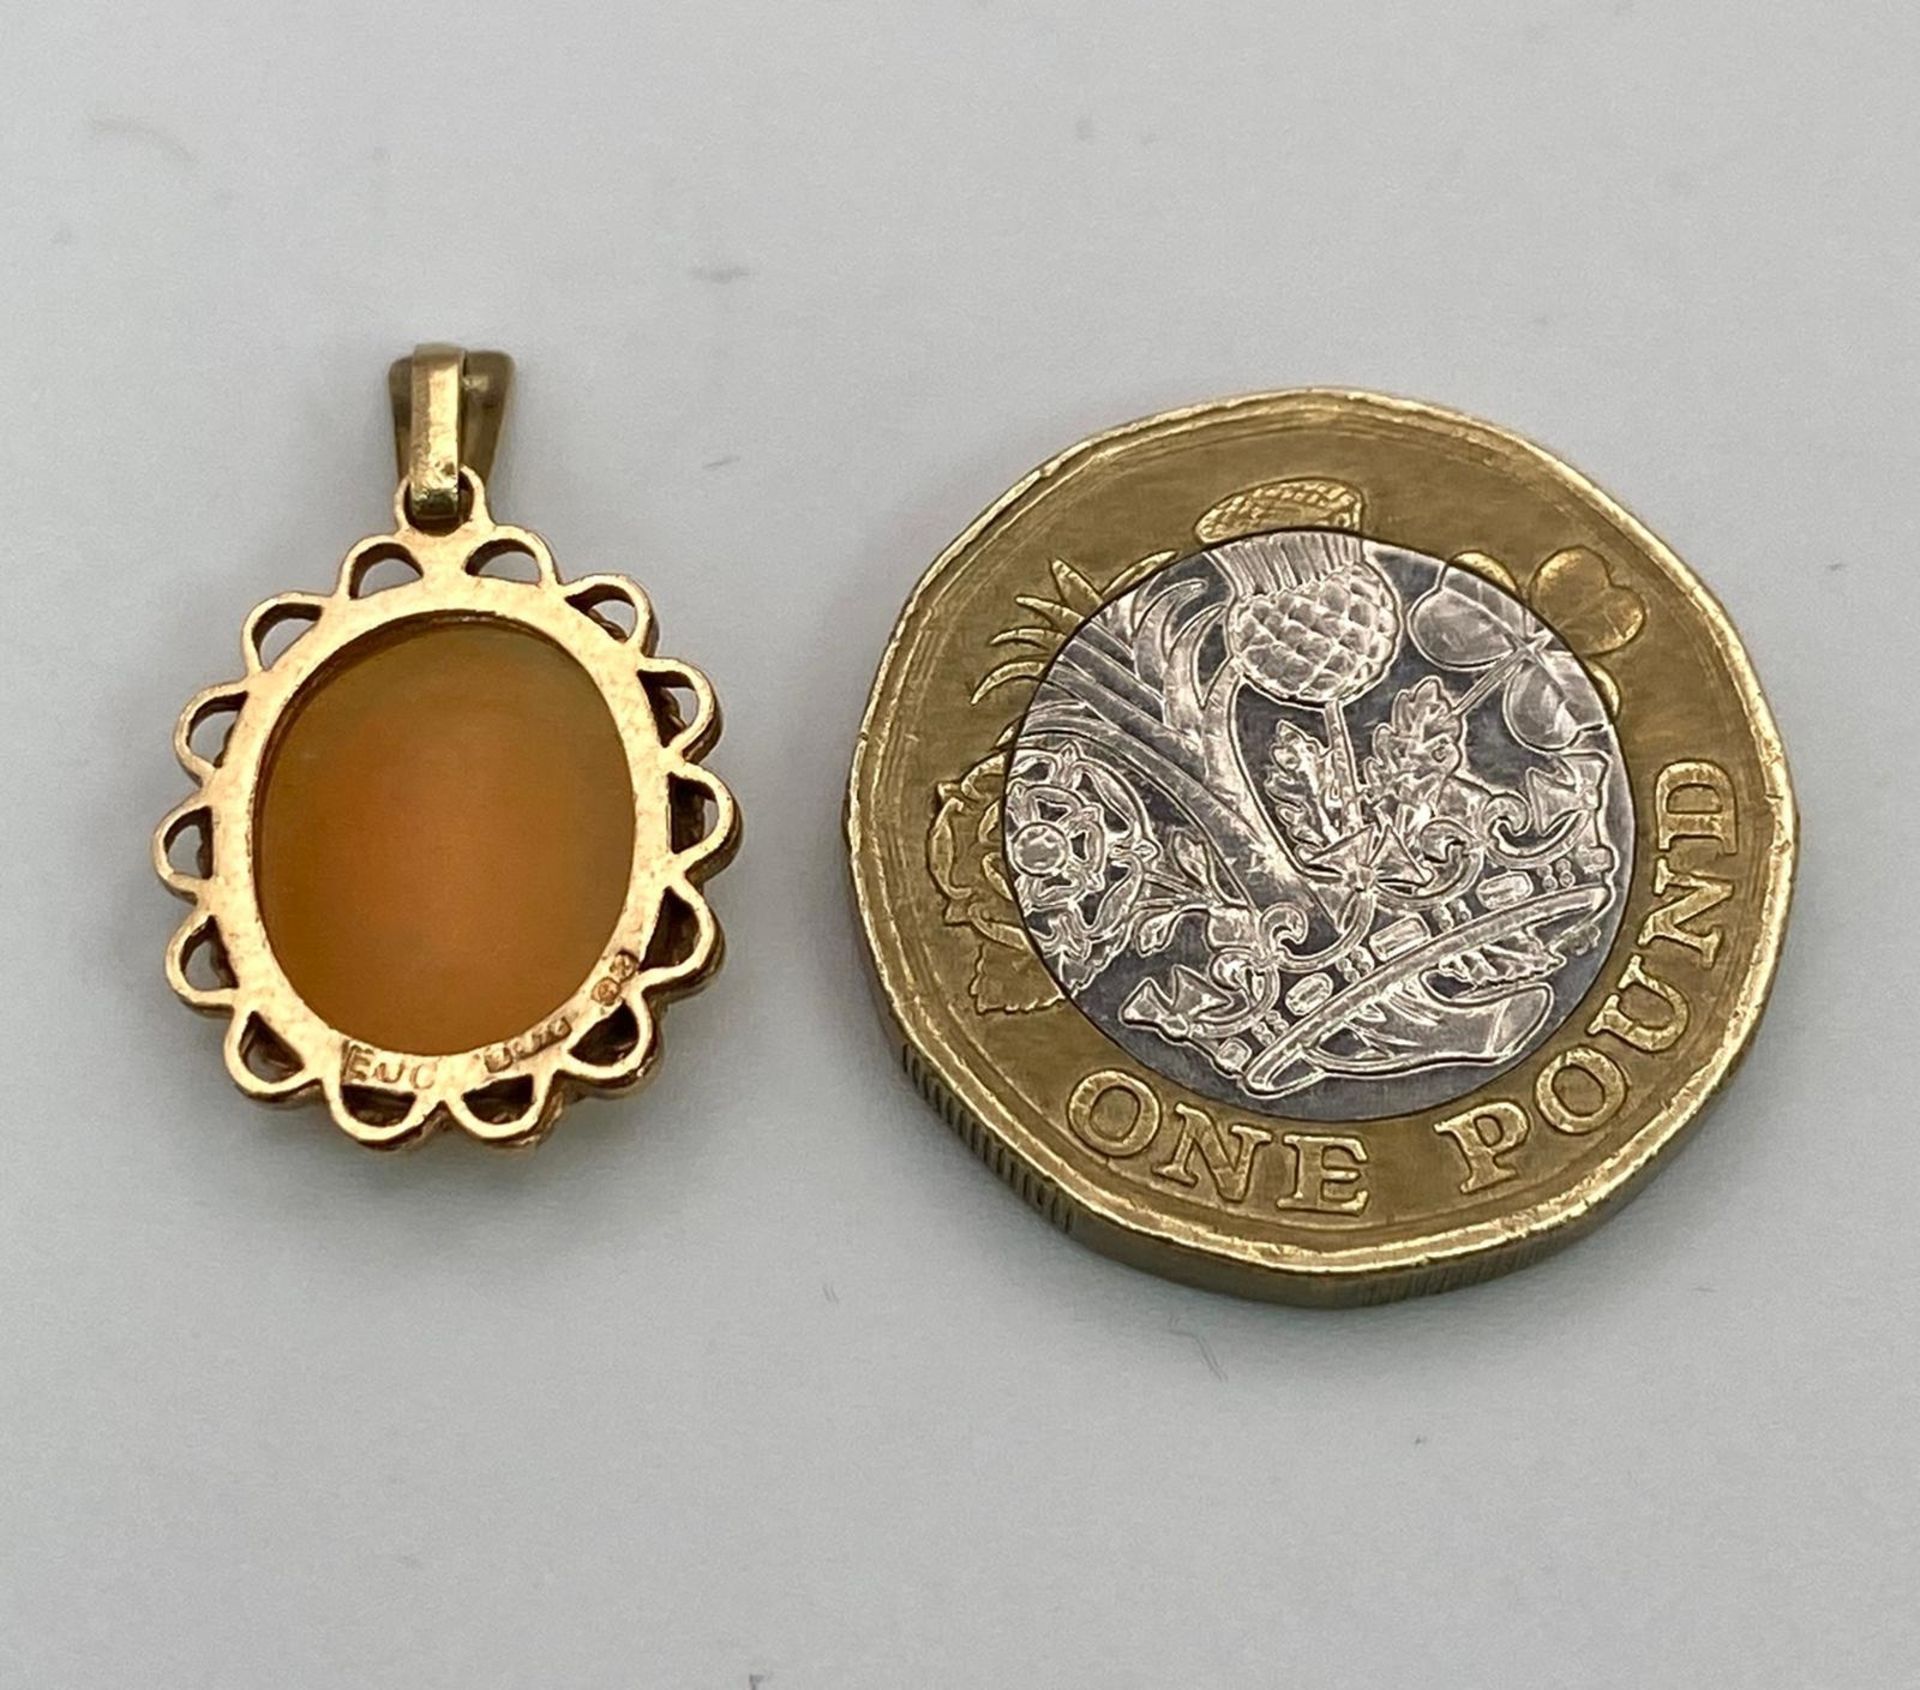 A Small Vintage 9K Gold Cameo Pendant. 25mm. 1.43g total weight. - Image 2 of 3